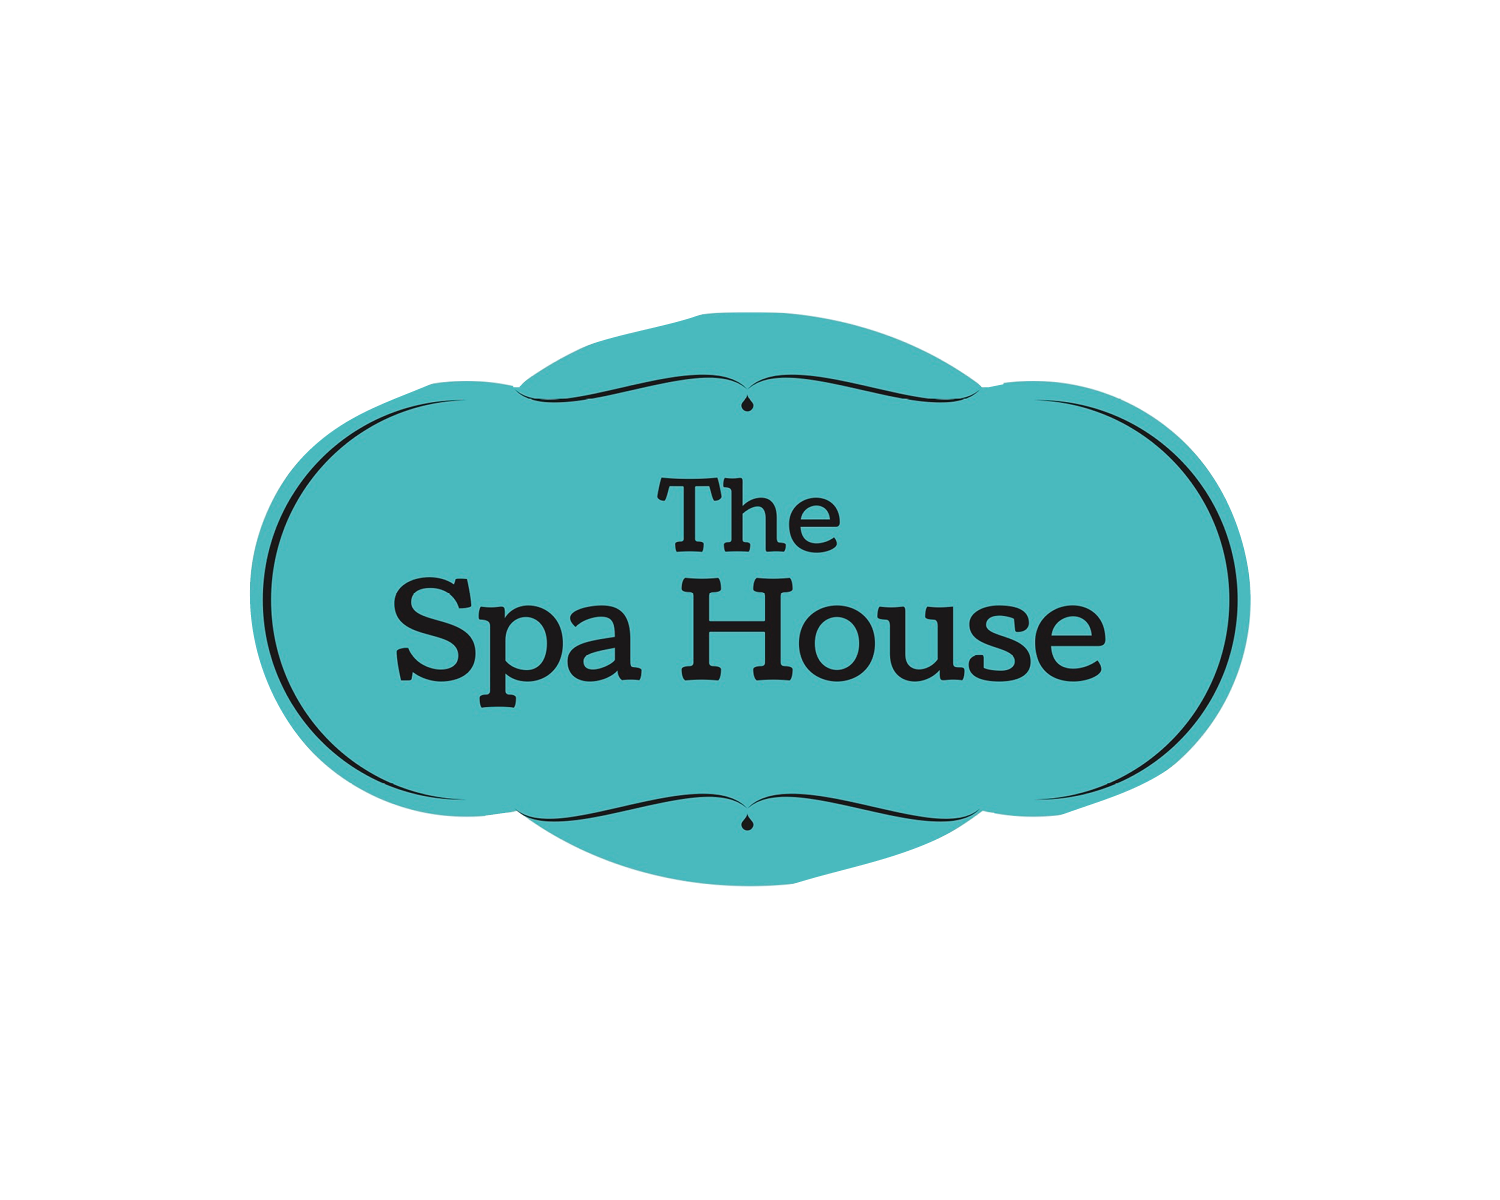 The Spa House